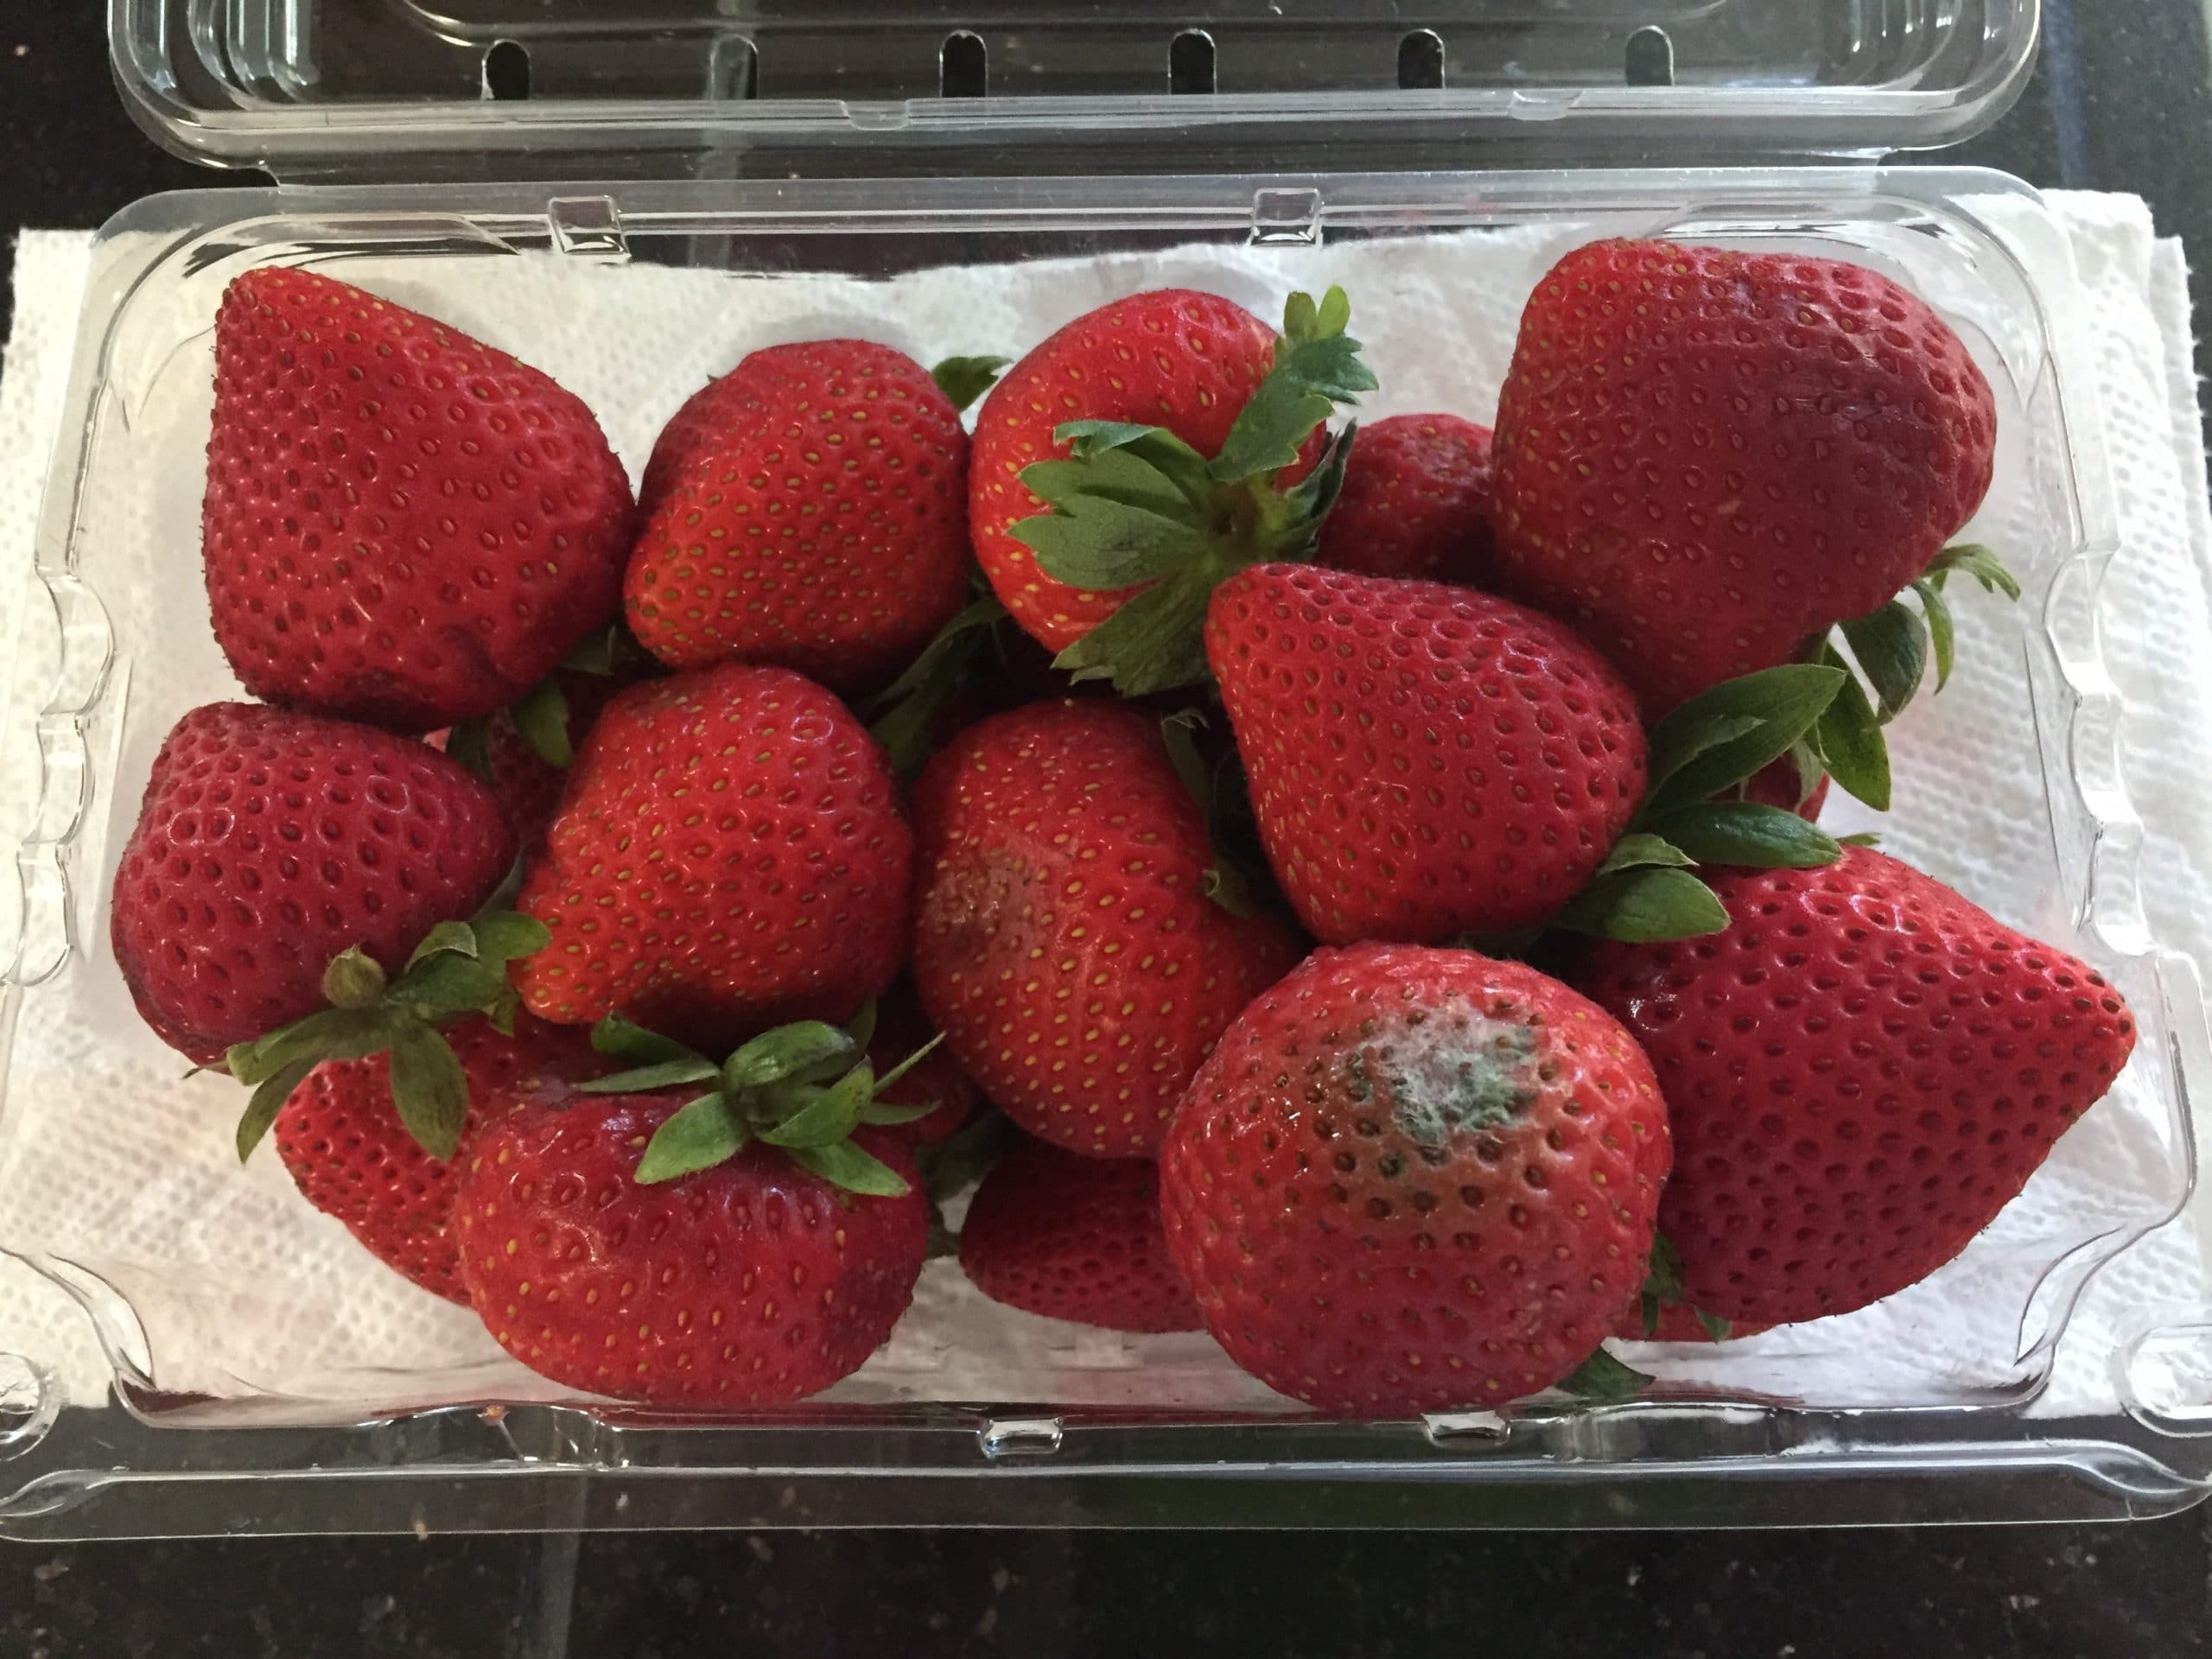 Keep those gray fuzzy strawberries in check